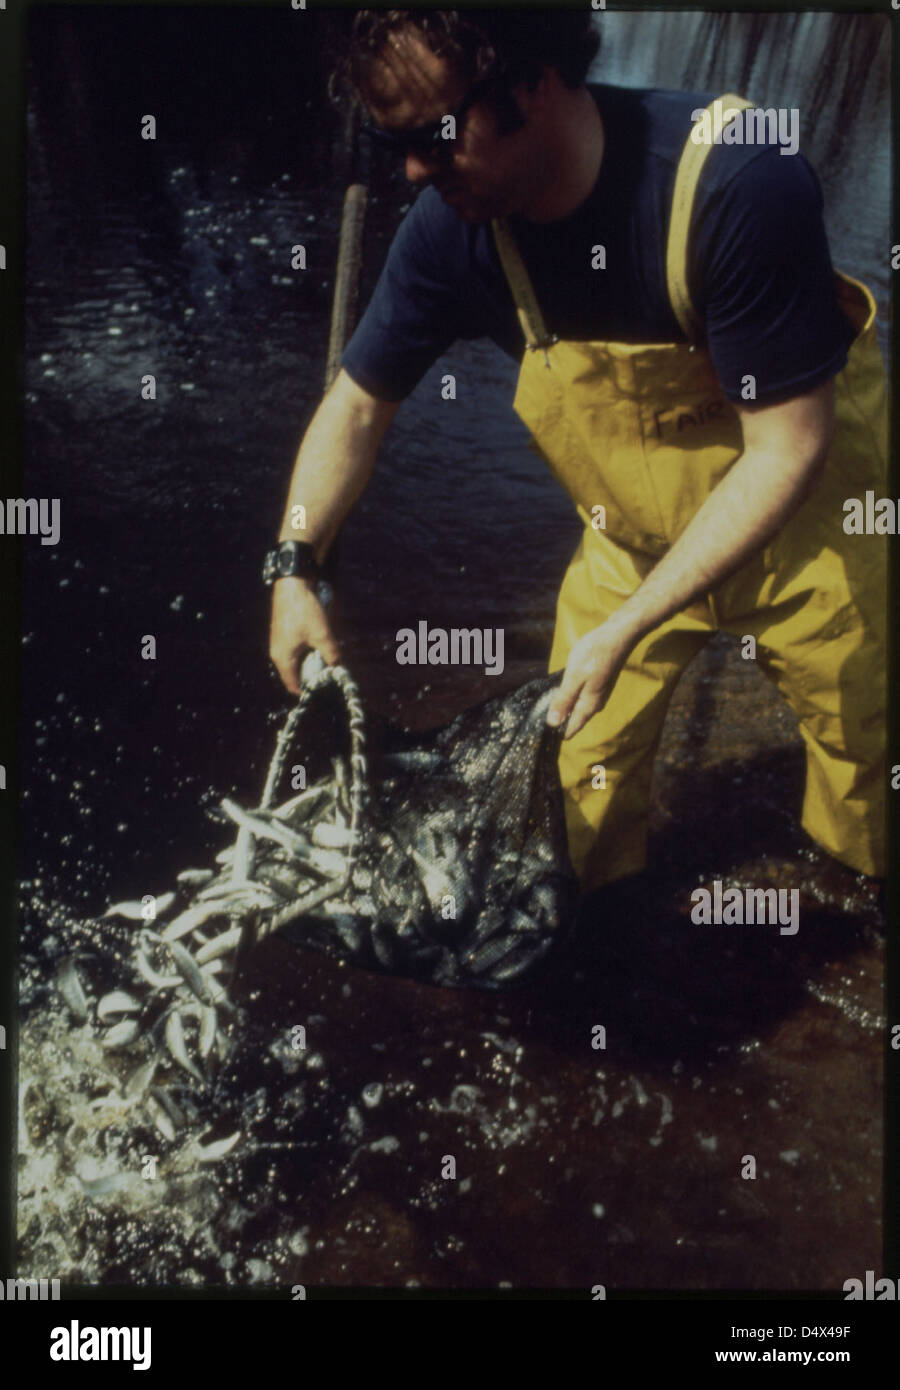 Massachusetts Division of Marine Fisheries Is Responsible for Stocking the North River with These Pacific Coast "Cohoe" Salmon . . . 04/1973 Stock Photo